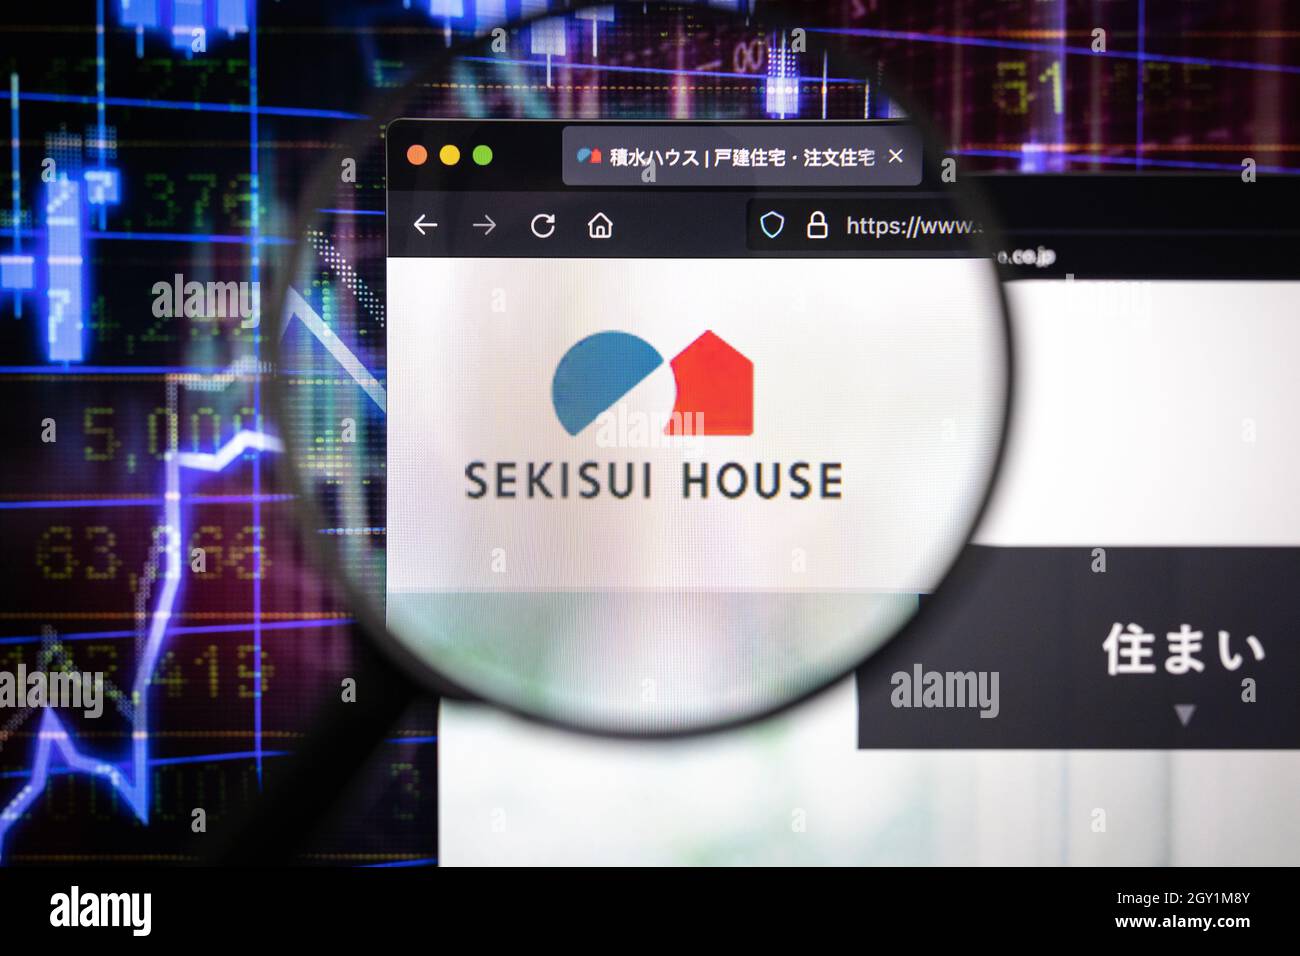 Sekisui House company logo on a website with blurry stock market developments in the background, seen on a computer screen through a magnifying glass Stock Photo